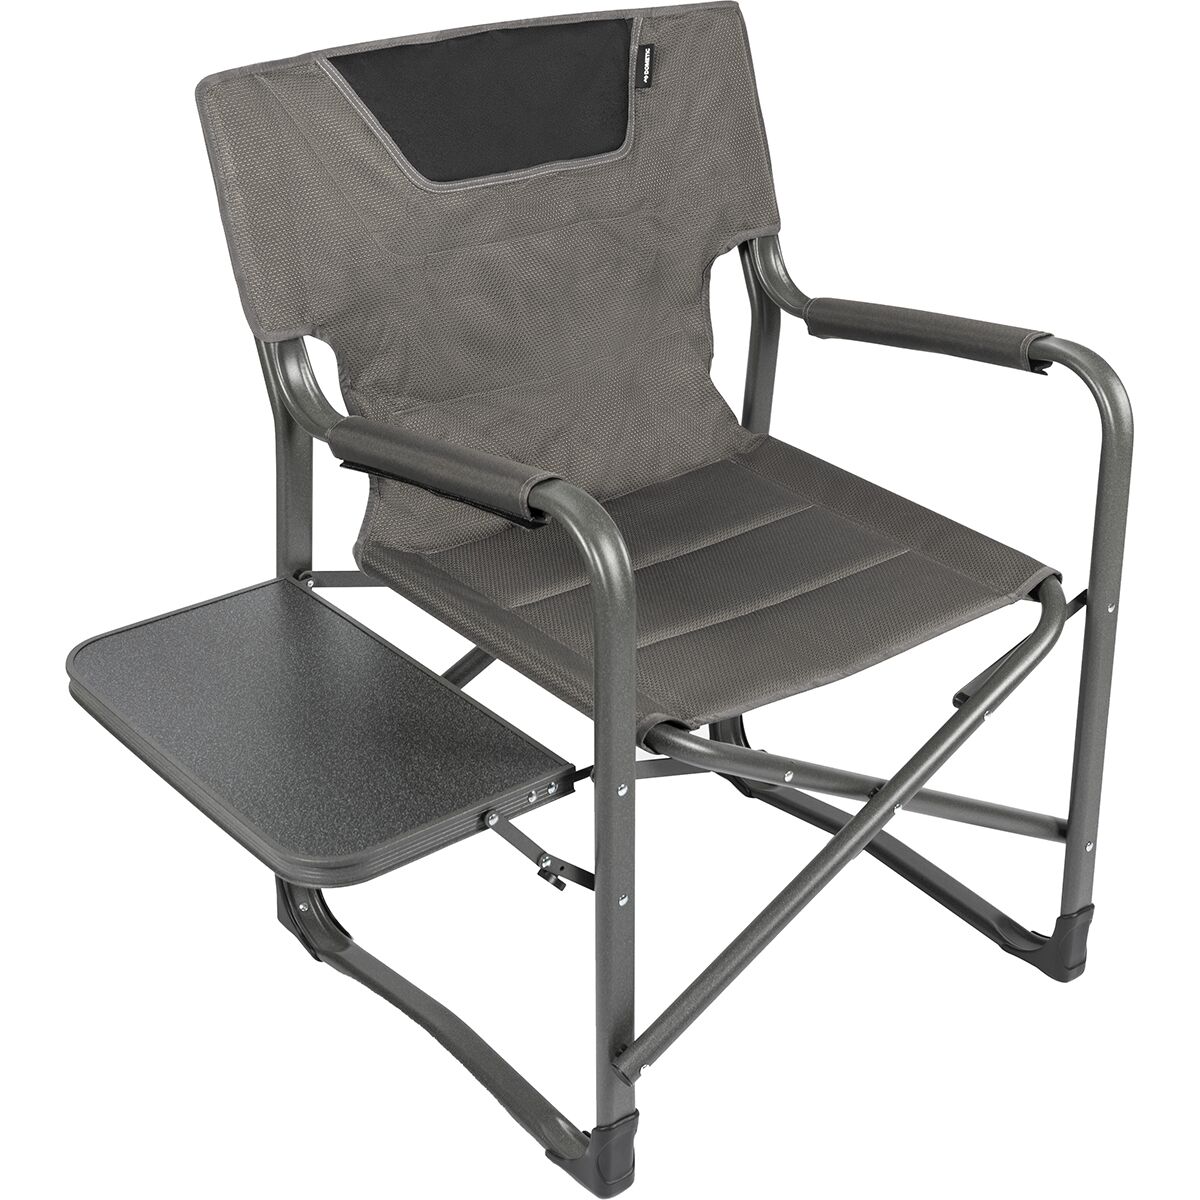 Photos - Outdoor Furniture Dometic Waeco Forte 180 Folding Camp Chair 